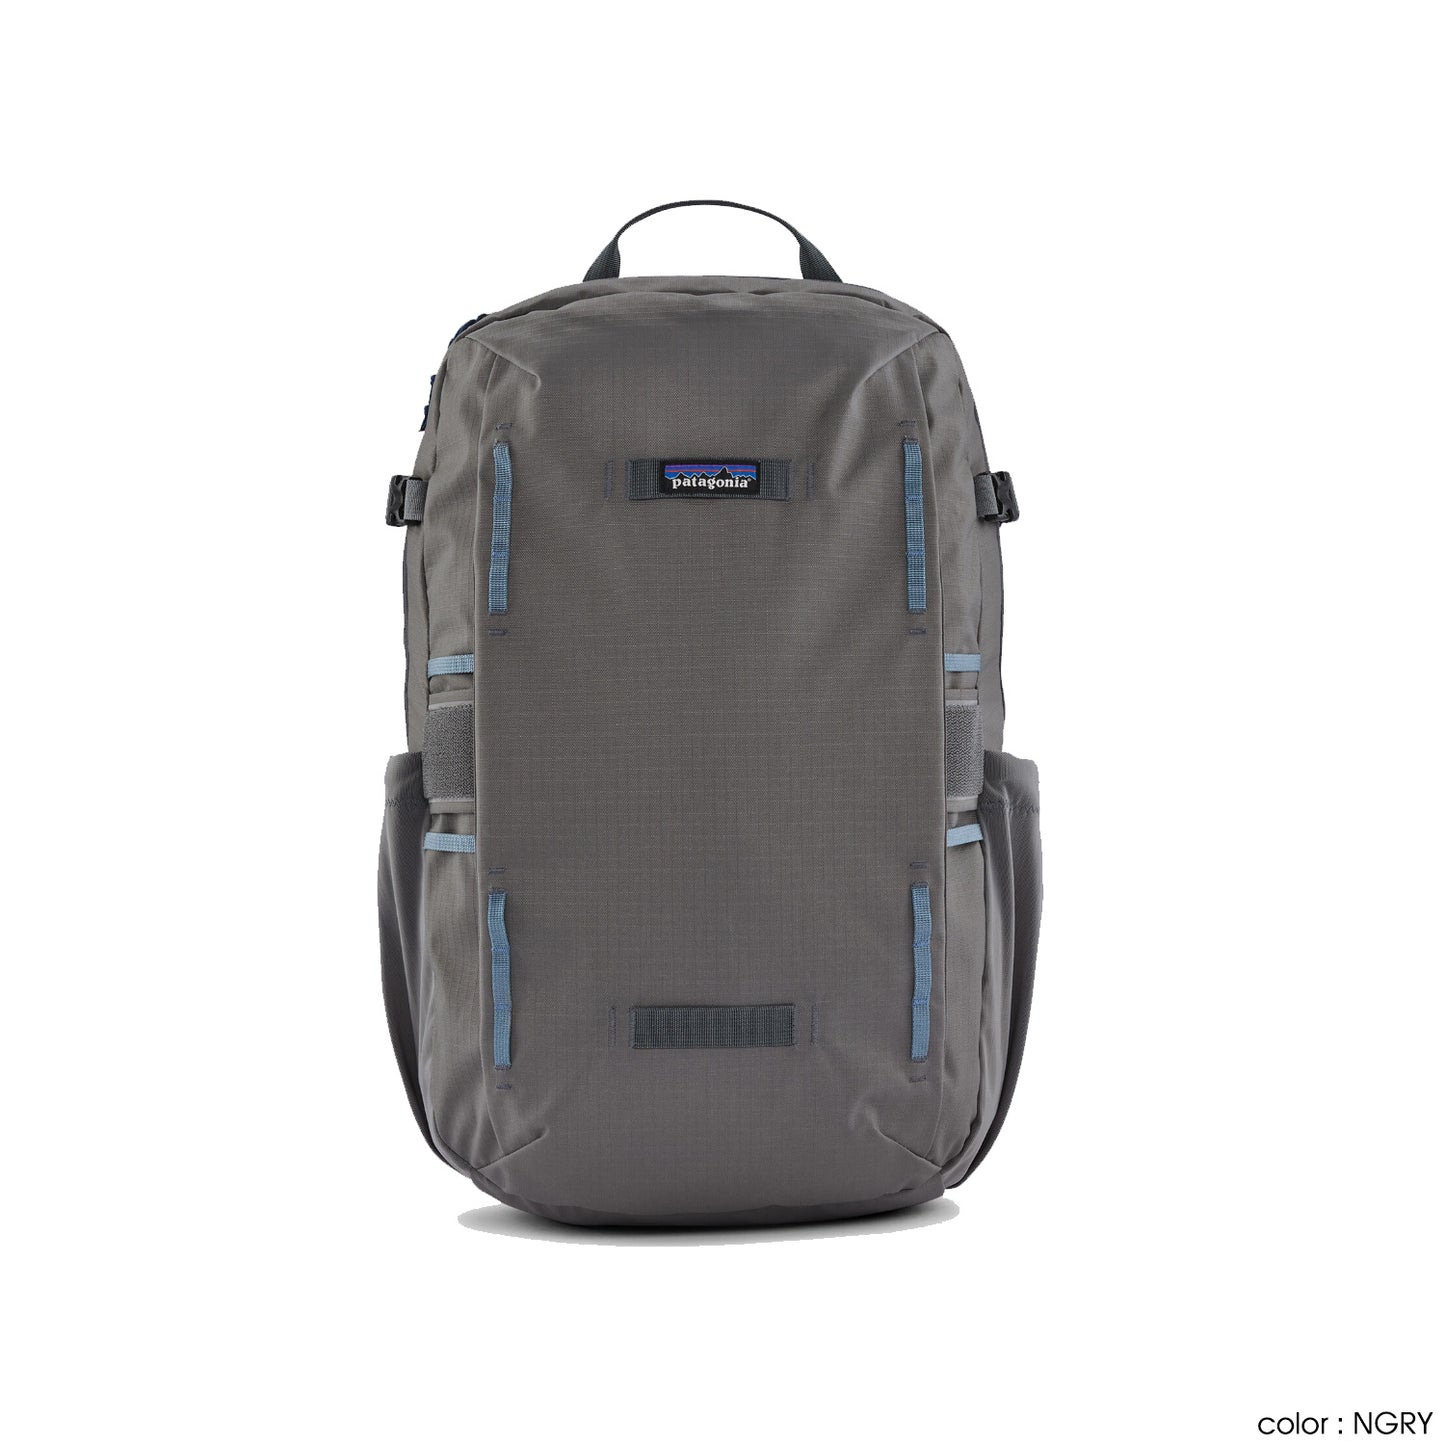 patagonia(パタゴニア) Stealth Pack 89167